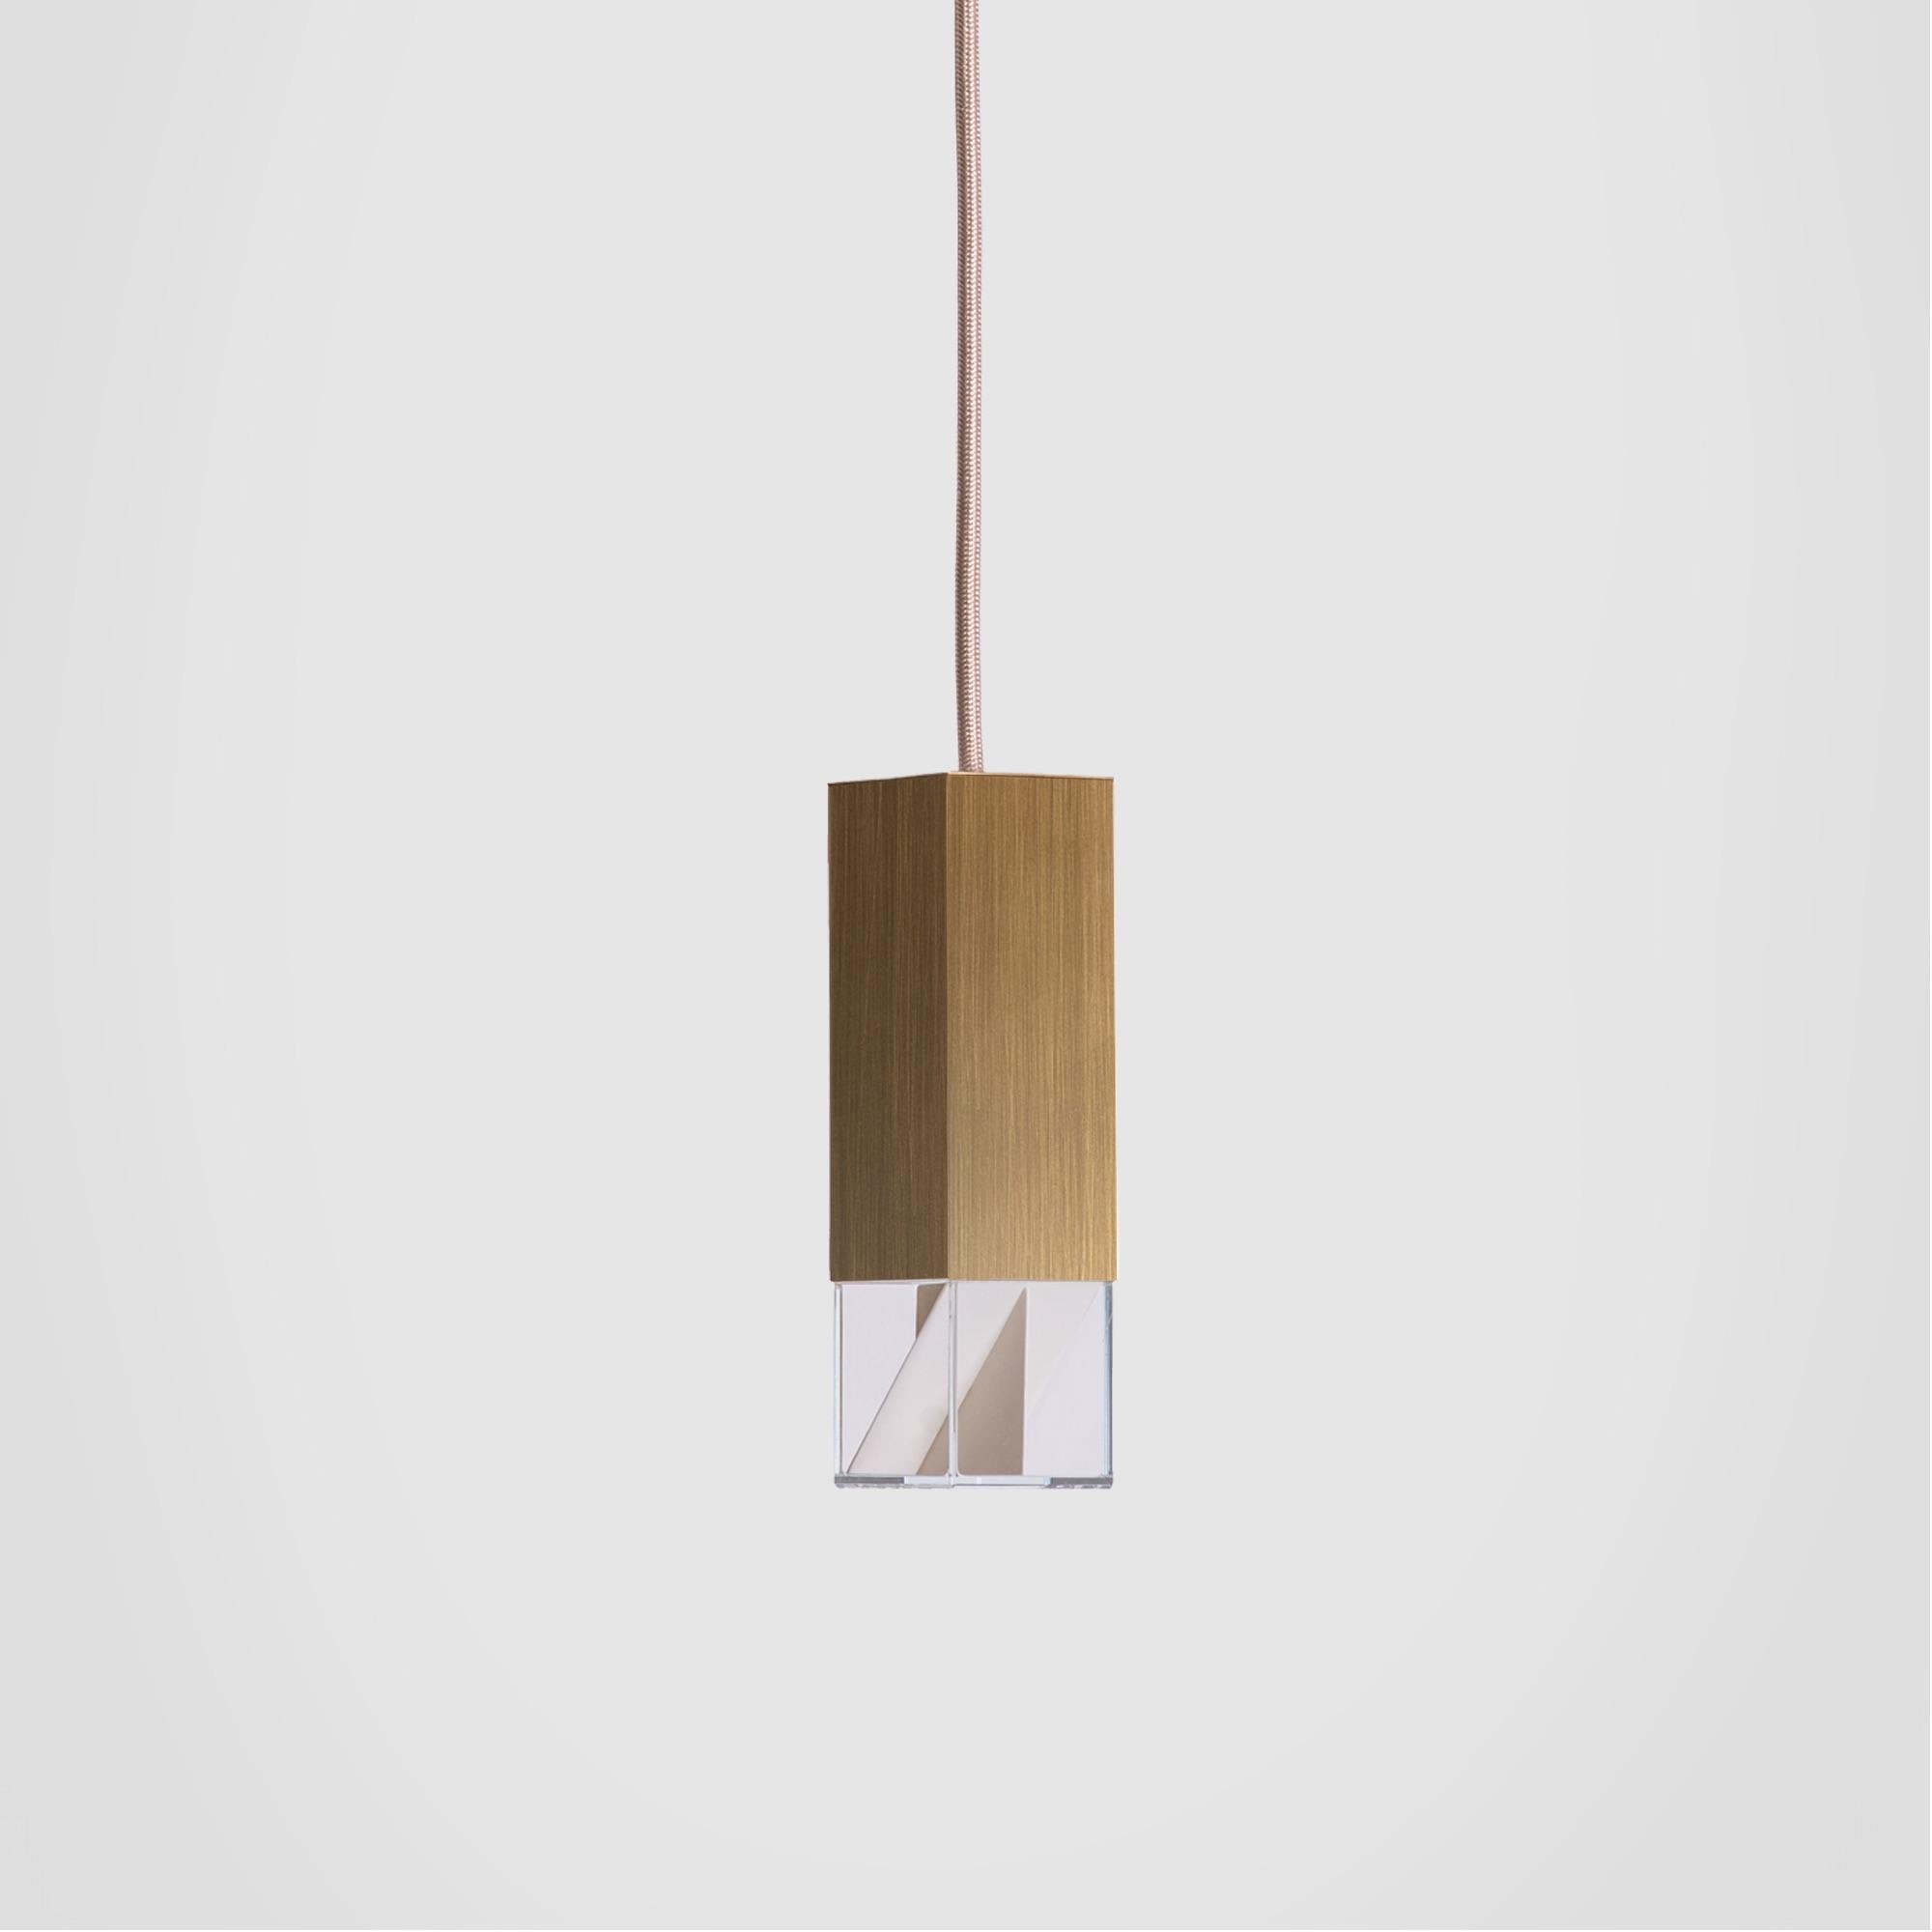 About
Contemporary Satin Brass Single Pendant Lamp by Formaminima

Lamp/One Brass Revamp 01 Edition
Design by Formaminima
Single pendant
Materials:
Body lamp handcrafted in burnished satin brass / crystal glass diffuser hosting Limoges